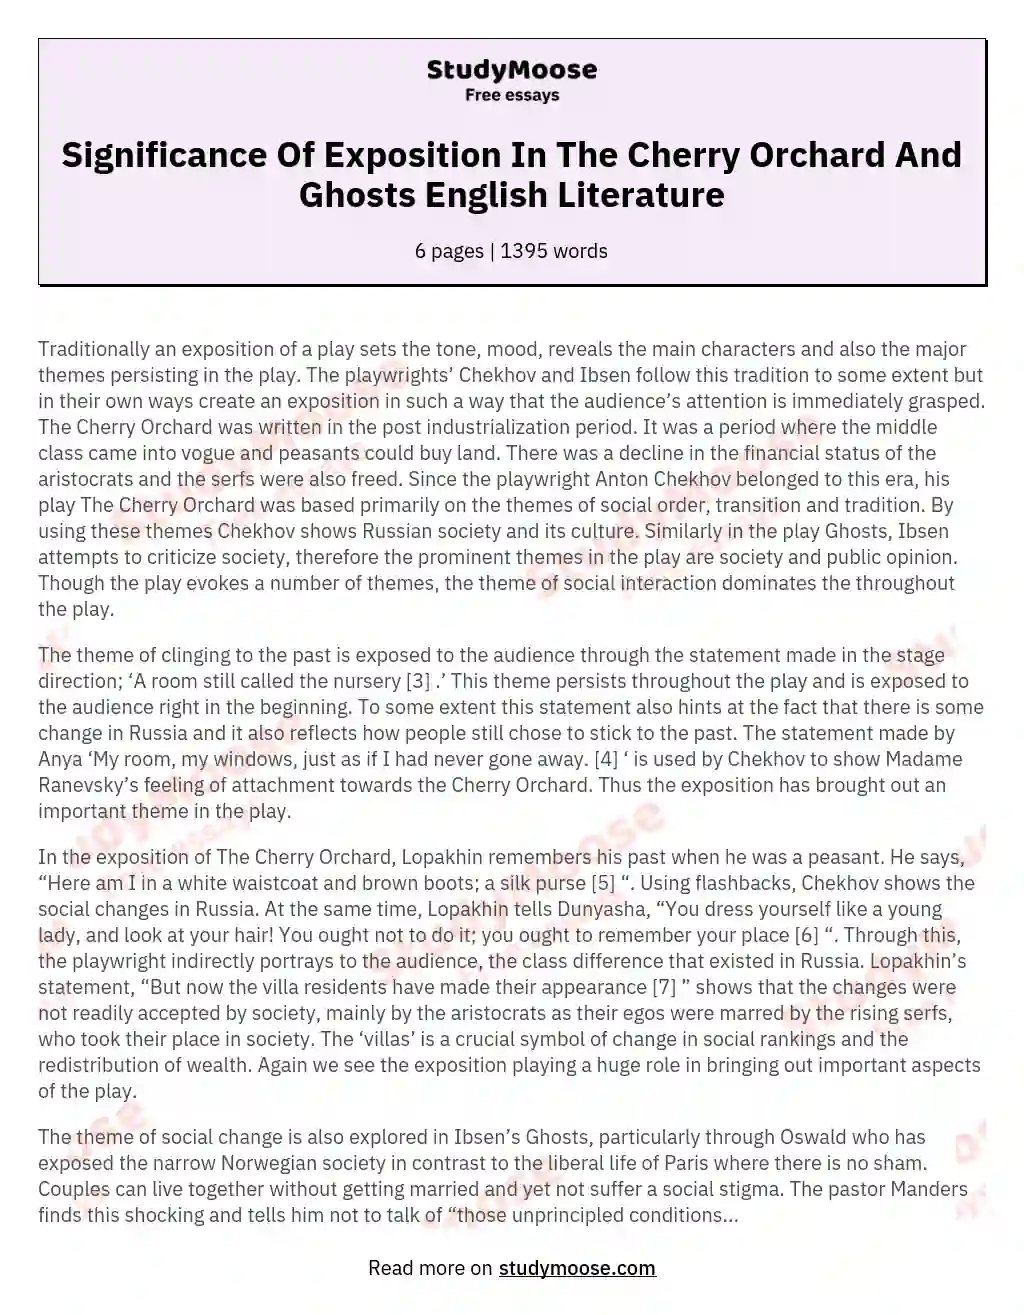 Significance Of Exposition In The Cherry Orchard And Ghosts English Literature essay